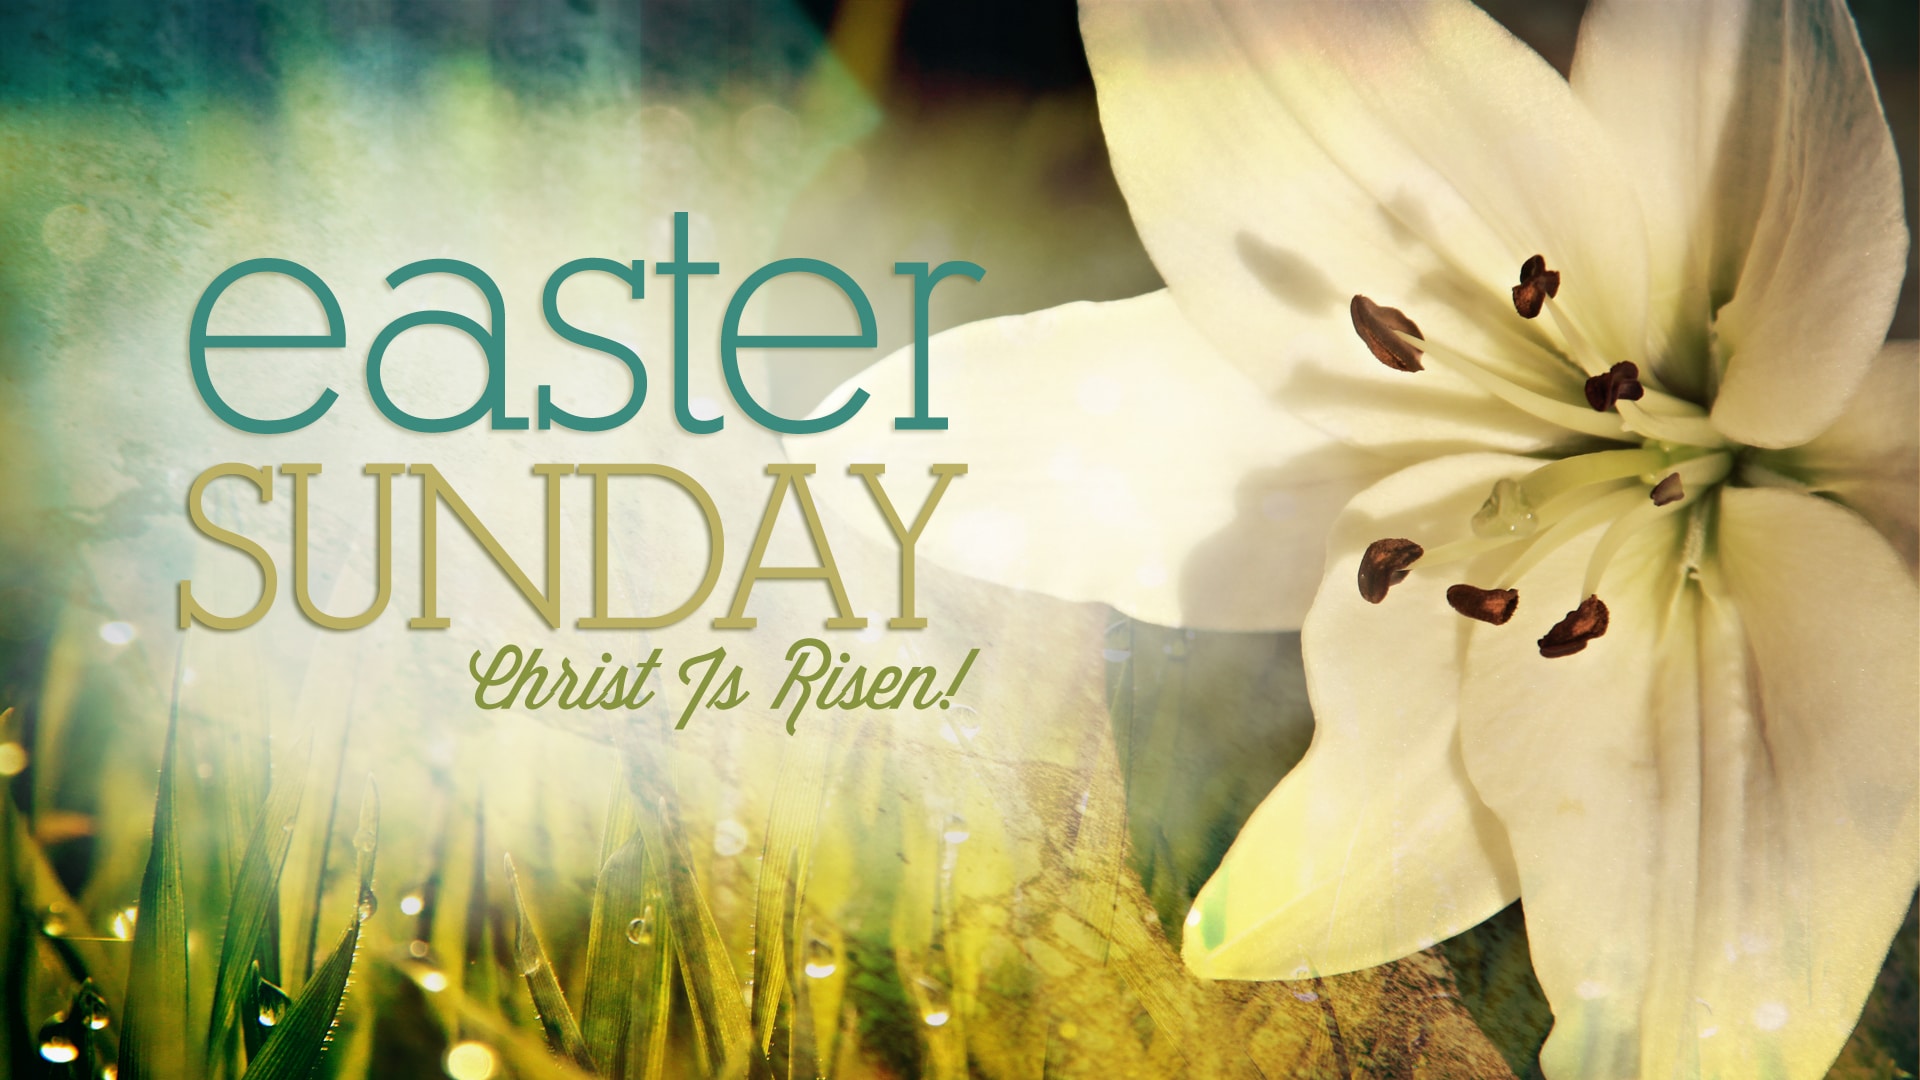 Sharing the Good News of Easter! insights life, song lyrics & video